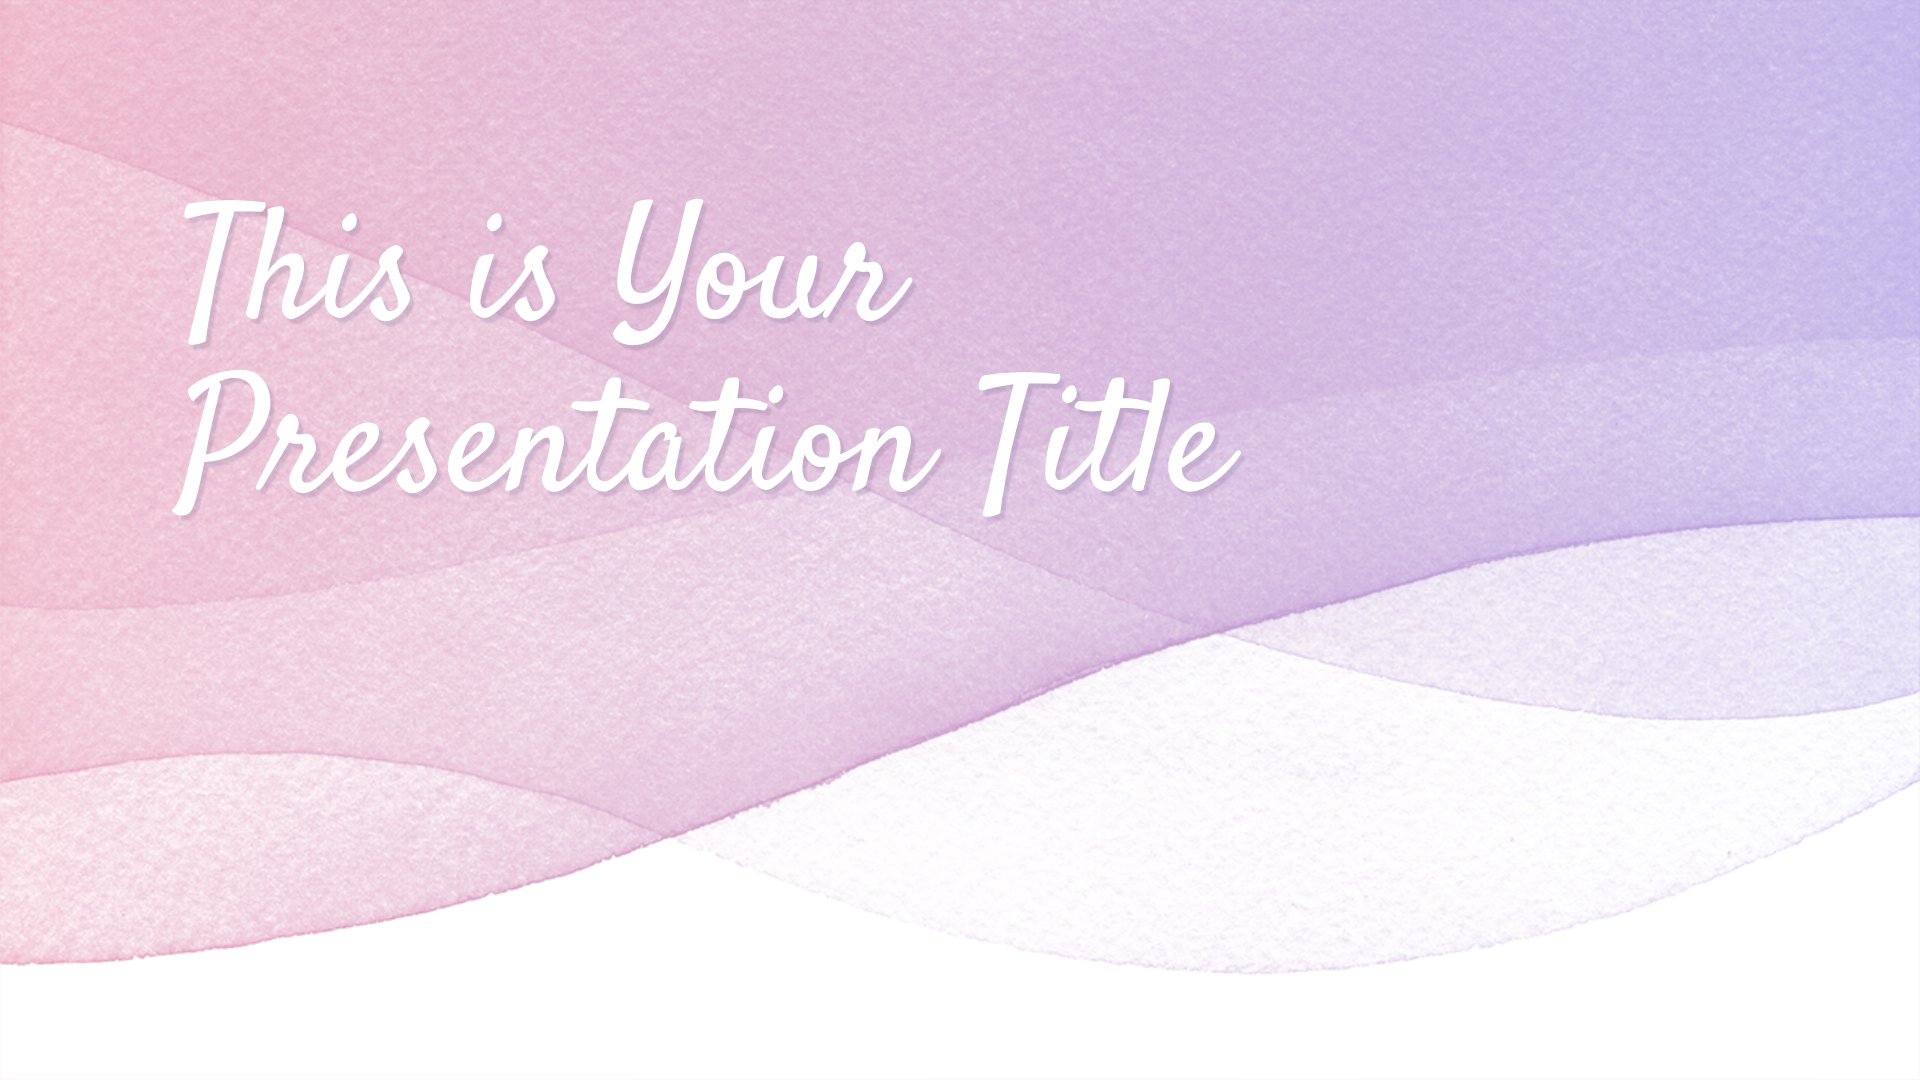 Watercolor waves presentation template in light pink color showing the title page